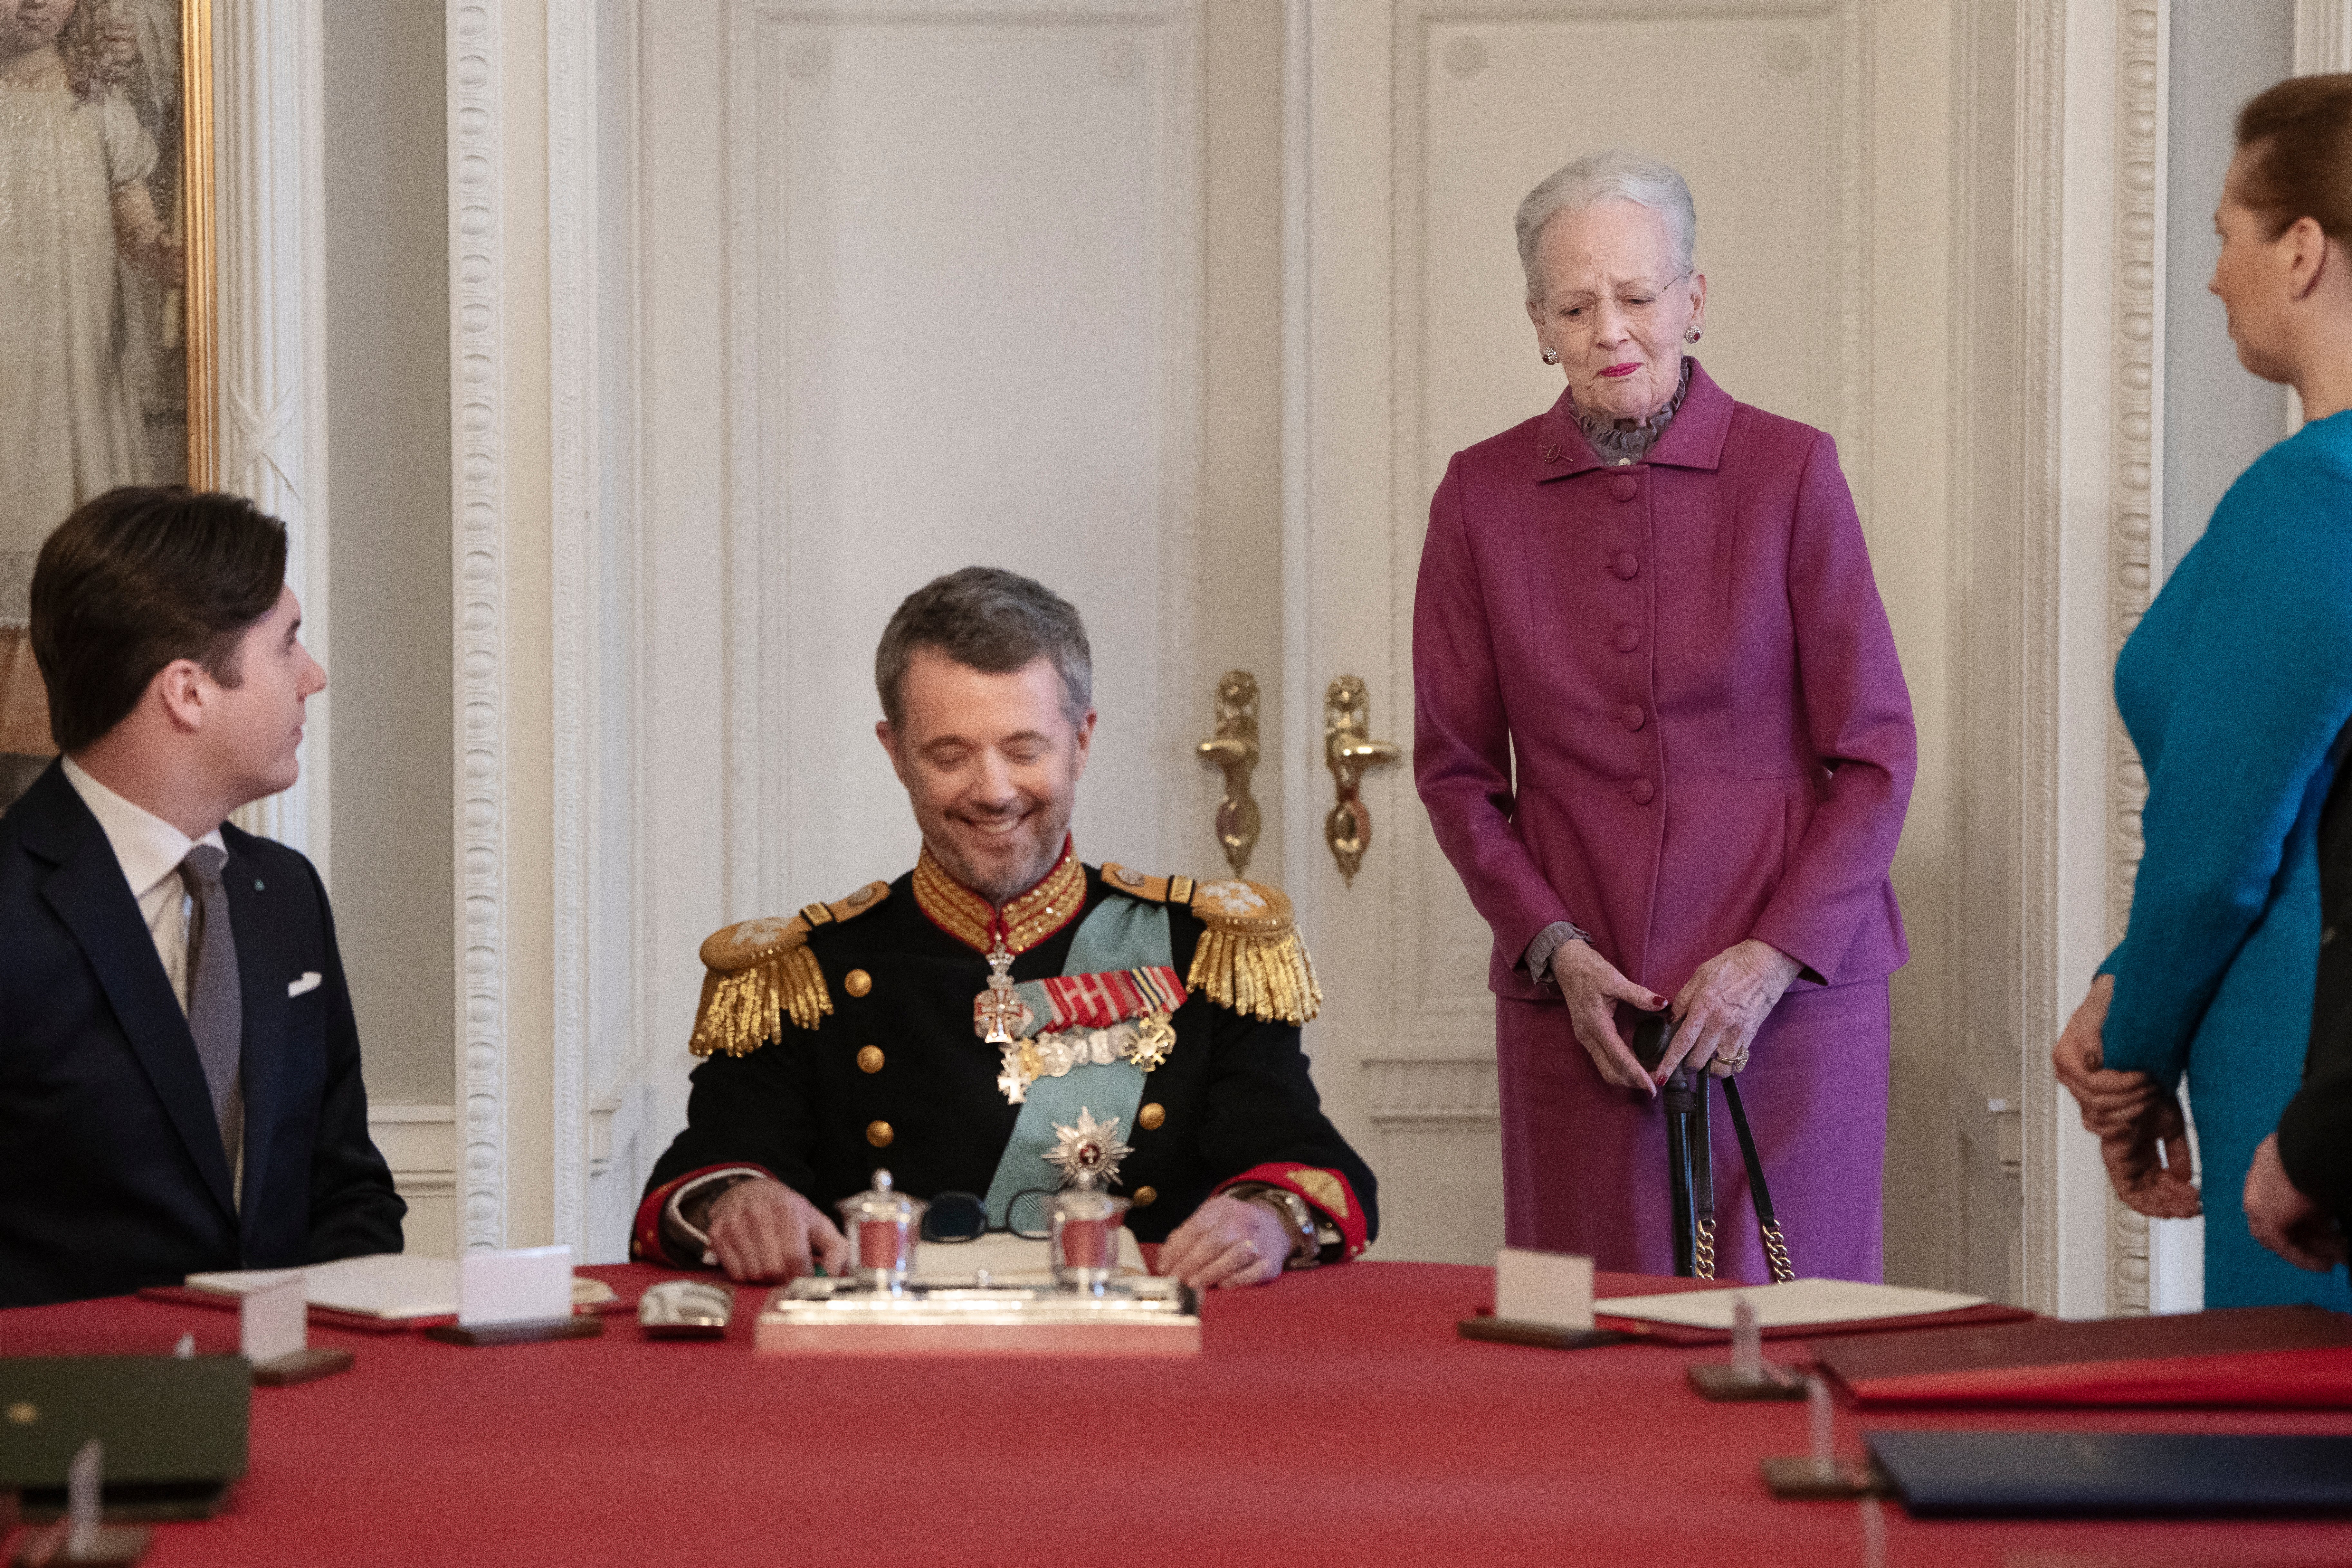 After signing the declaration of abdication Queen Margrethe II of Denmark, second right, leaves the seat at the head of the table to her son King Frederik X of Denmark